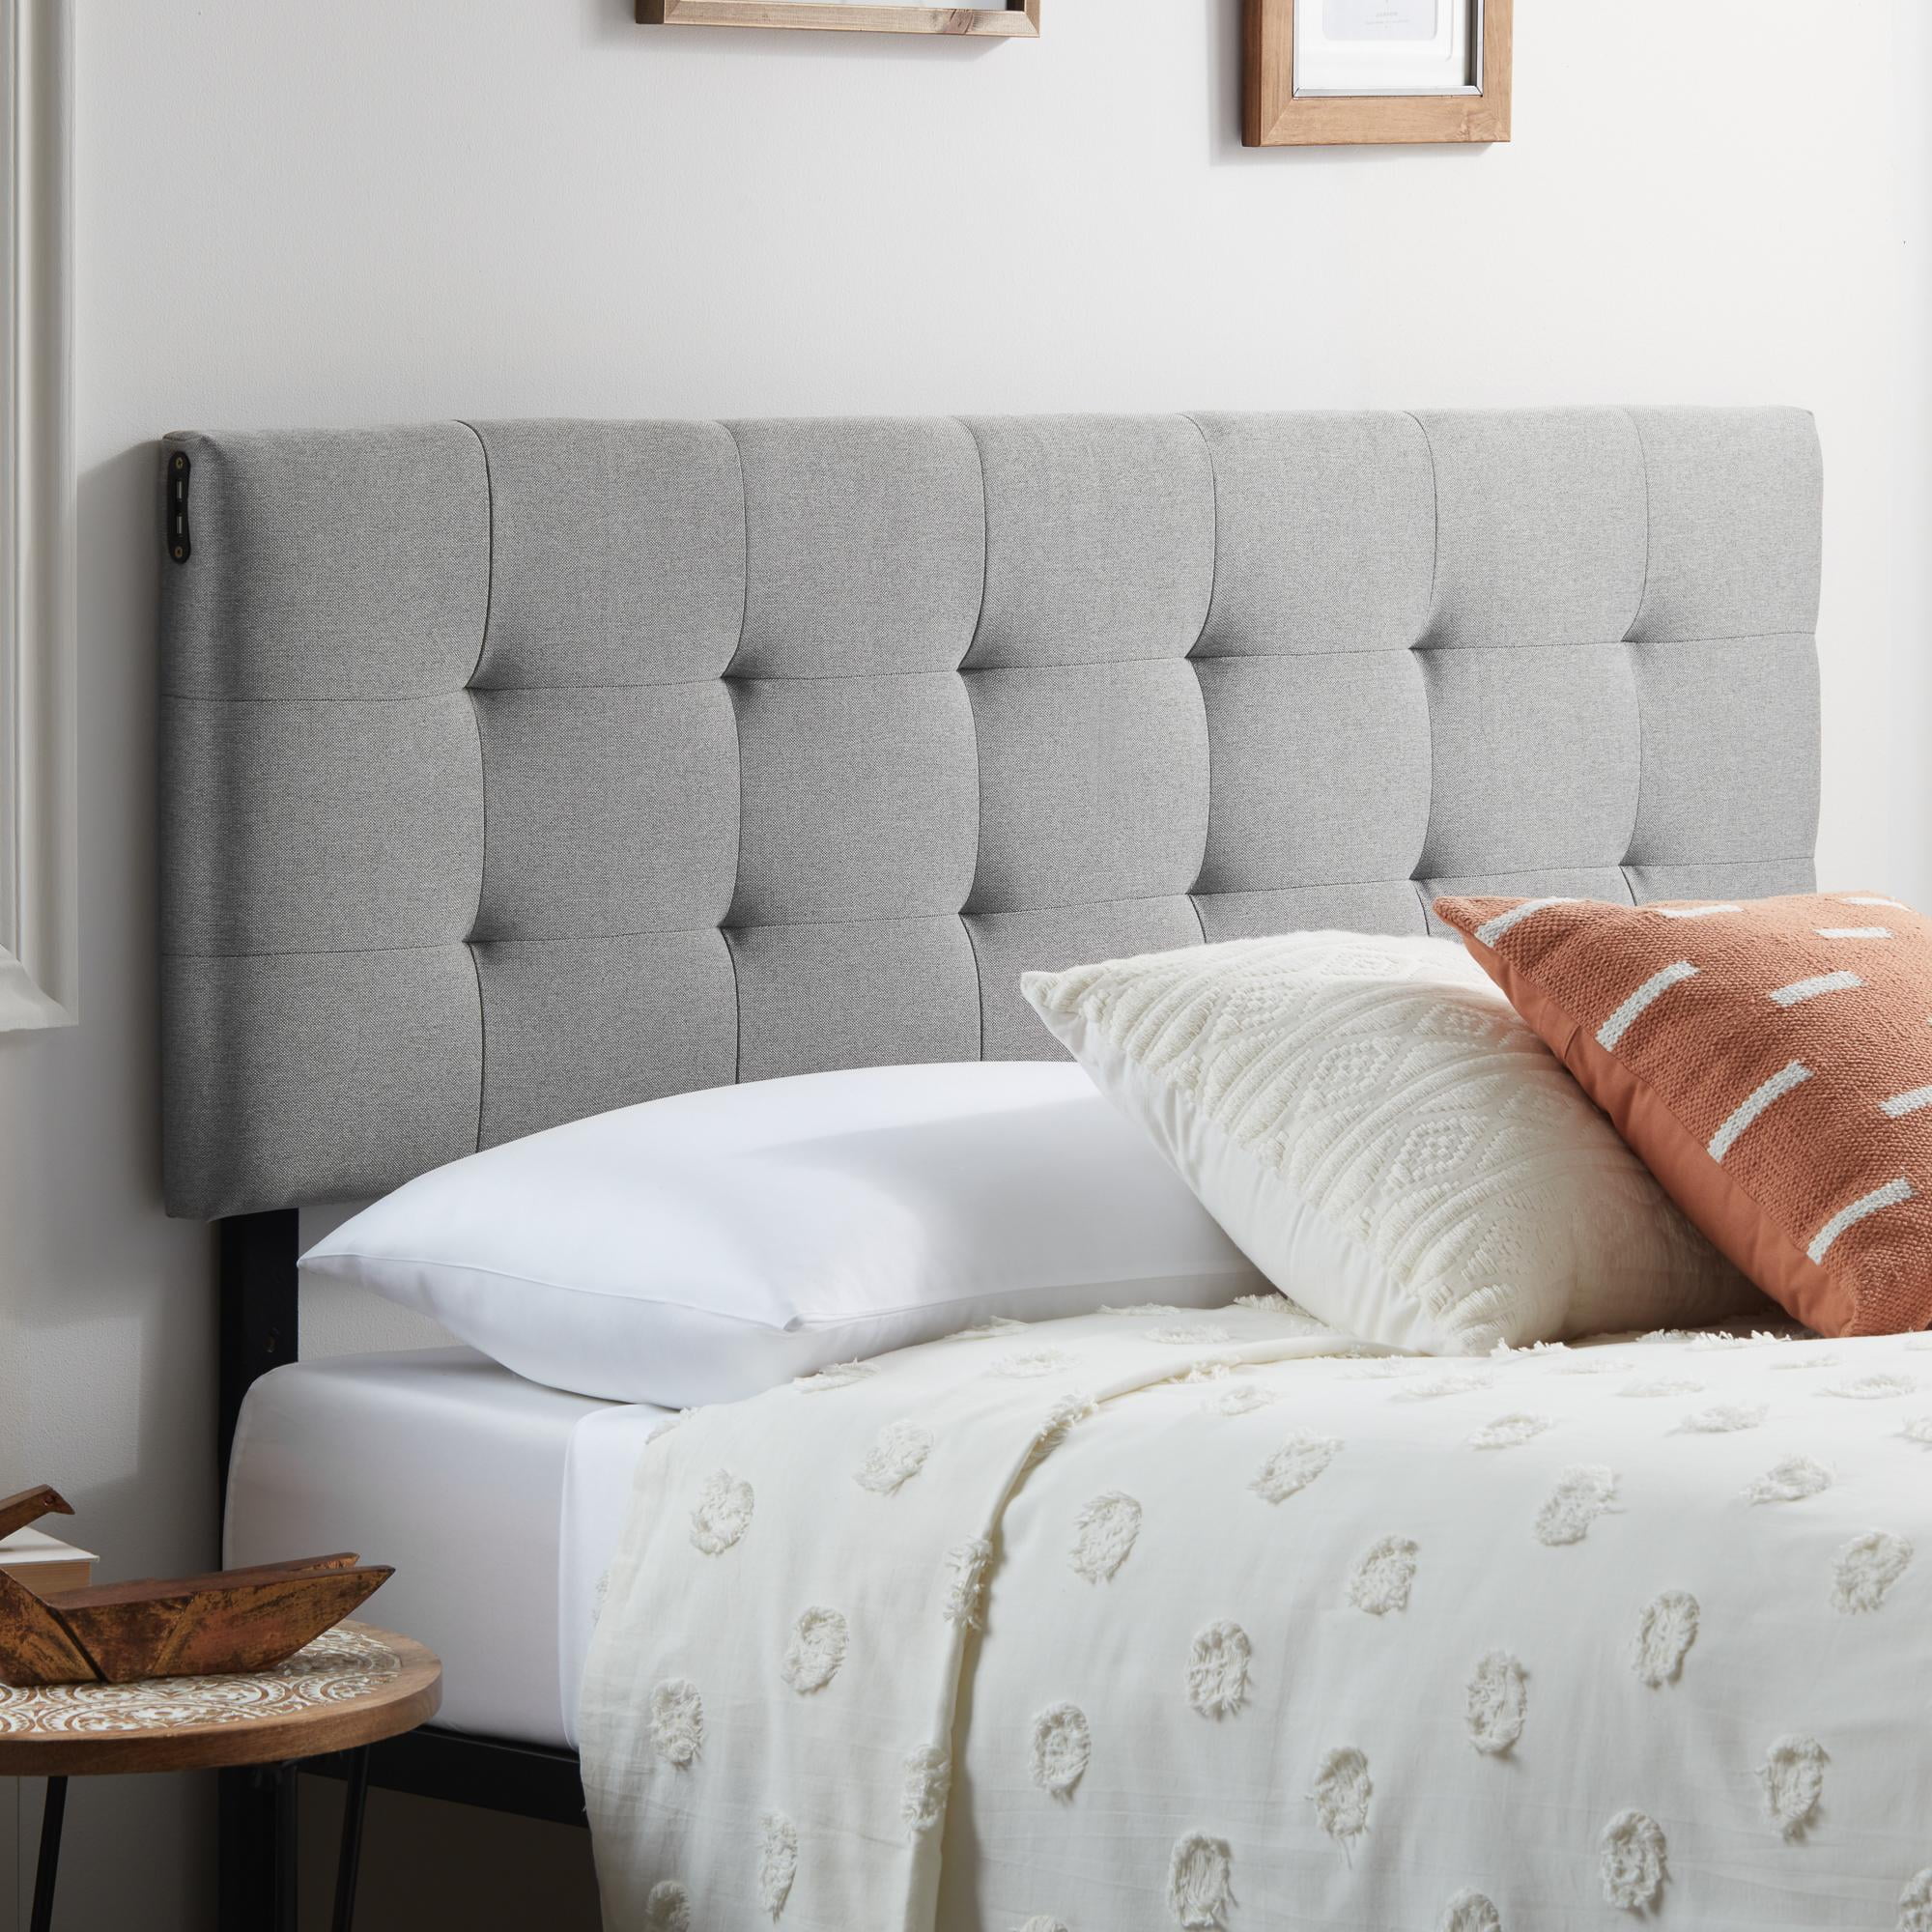 Rest Haven Upholstered Square Tufted, Gray Upholstered Headboard Queen